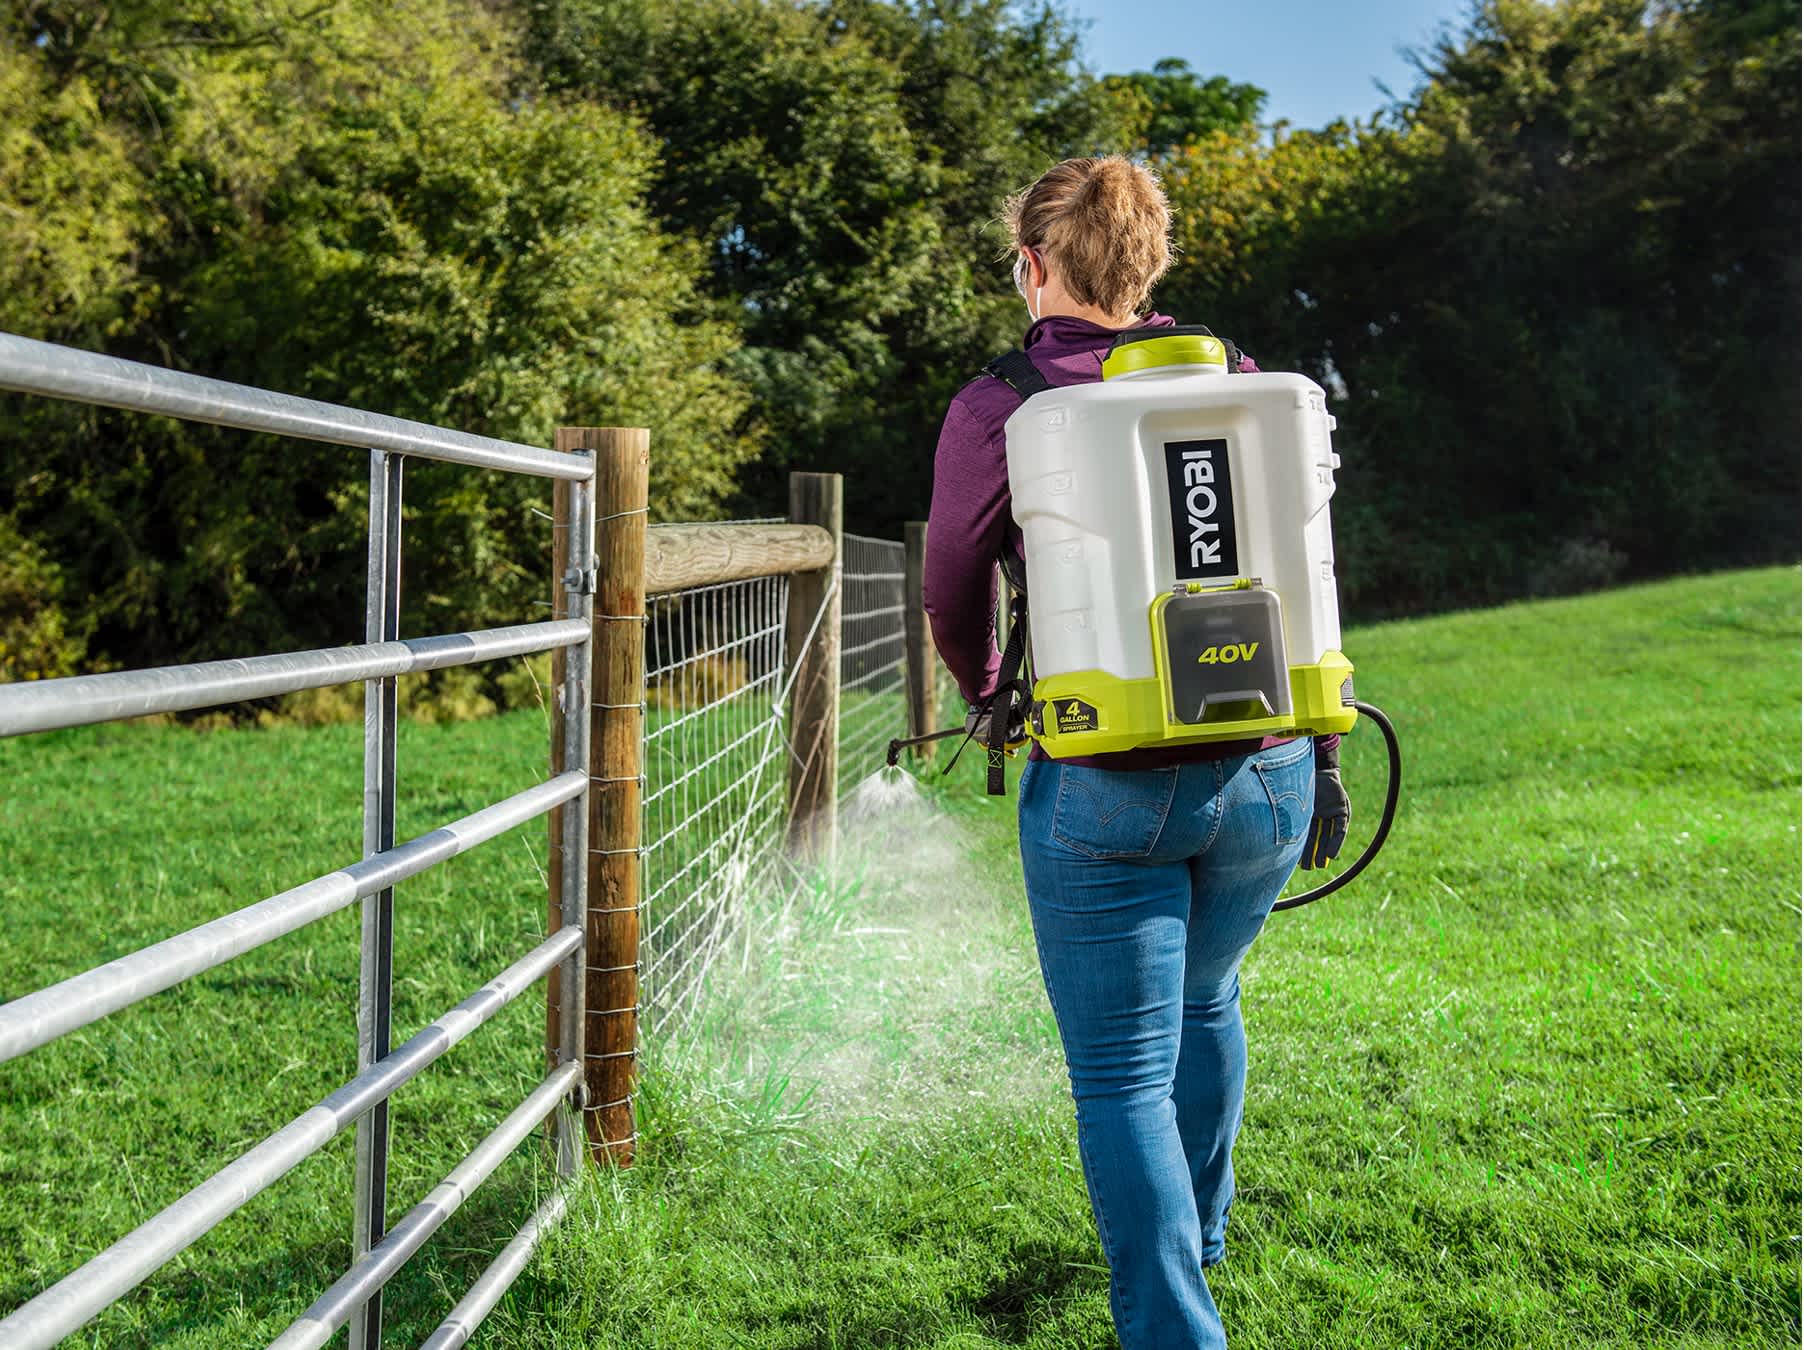 Product Features Image for 40V 4 GALLON BACKPACK CHEMICAL SPRAYER KIT.